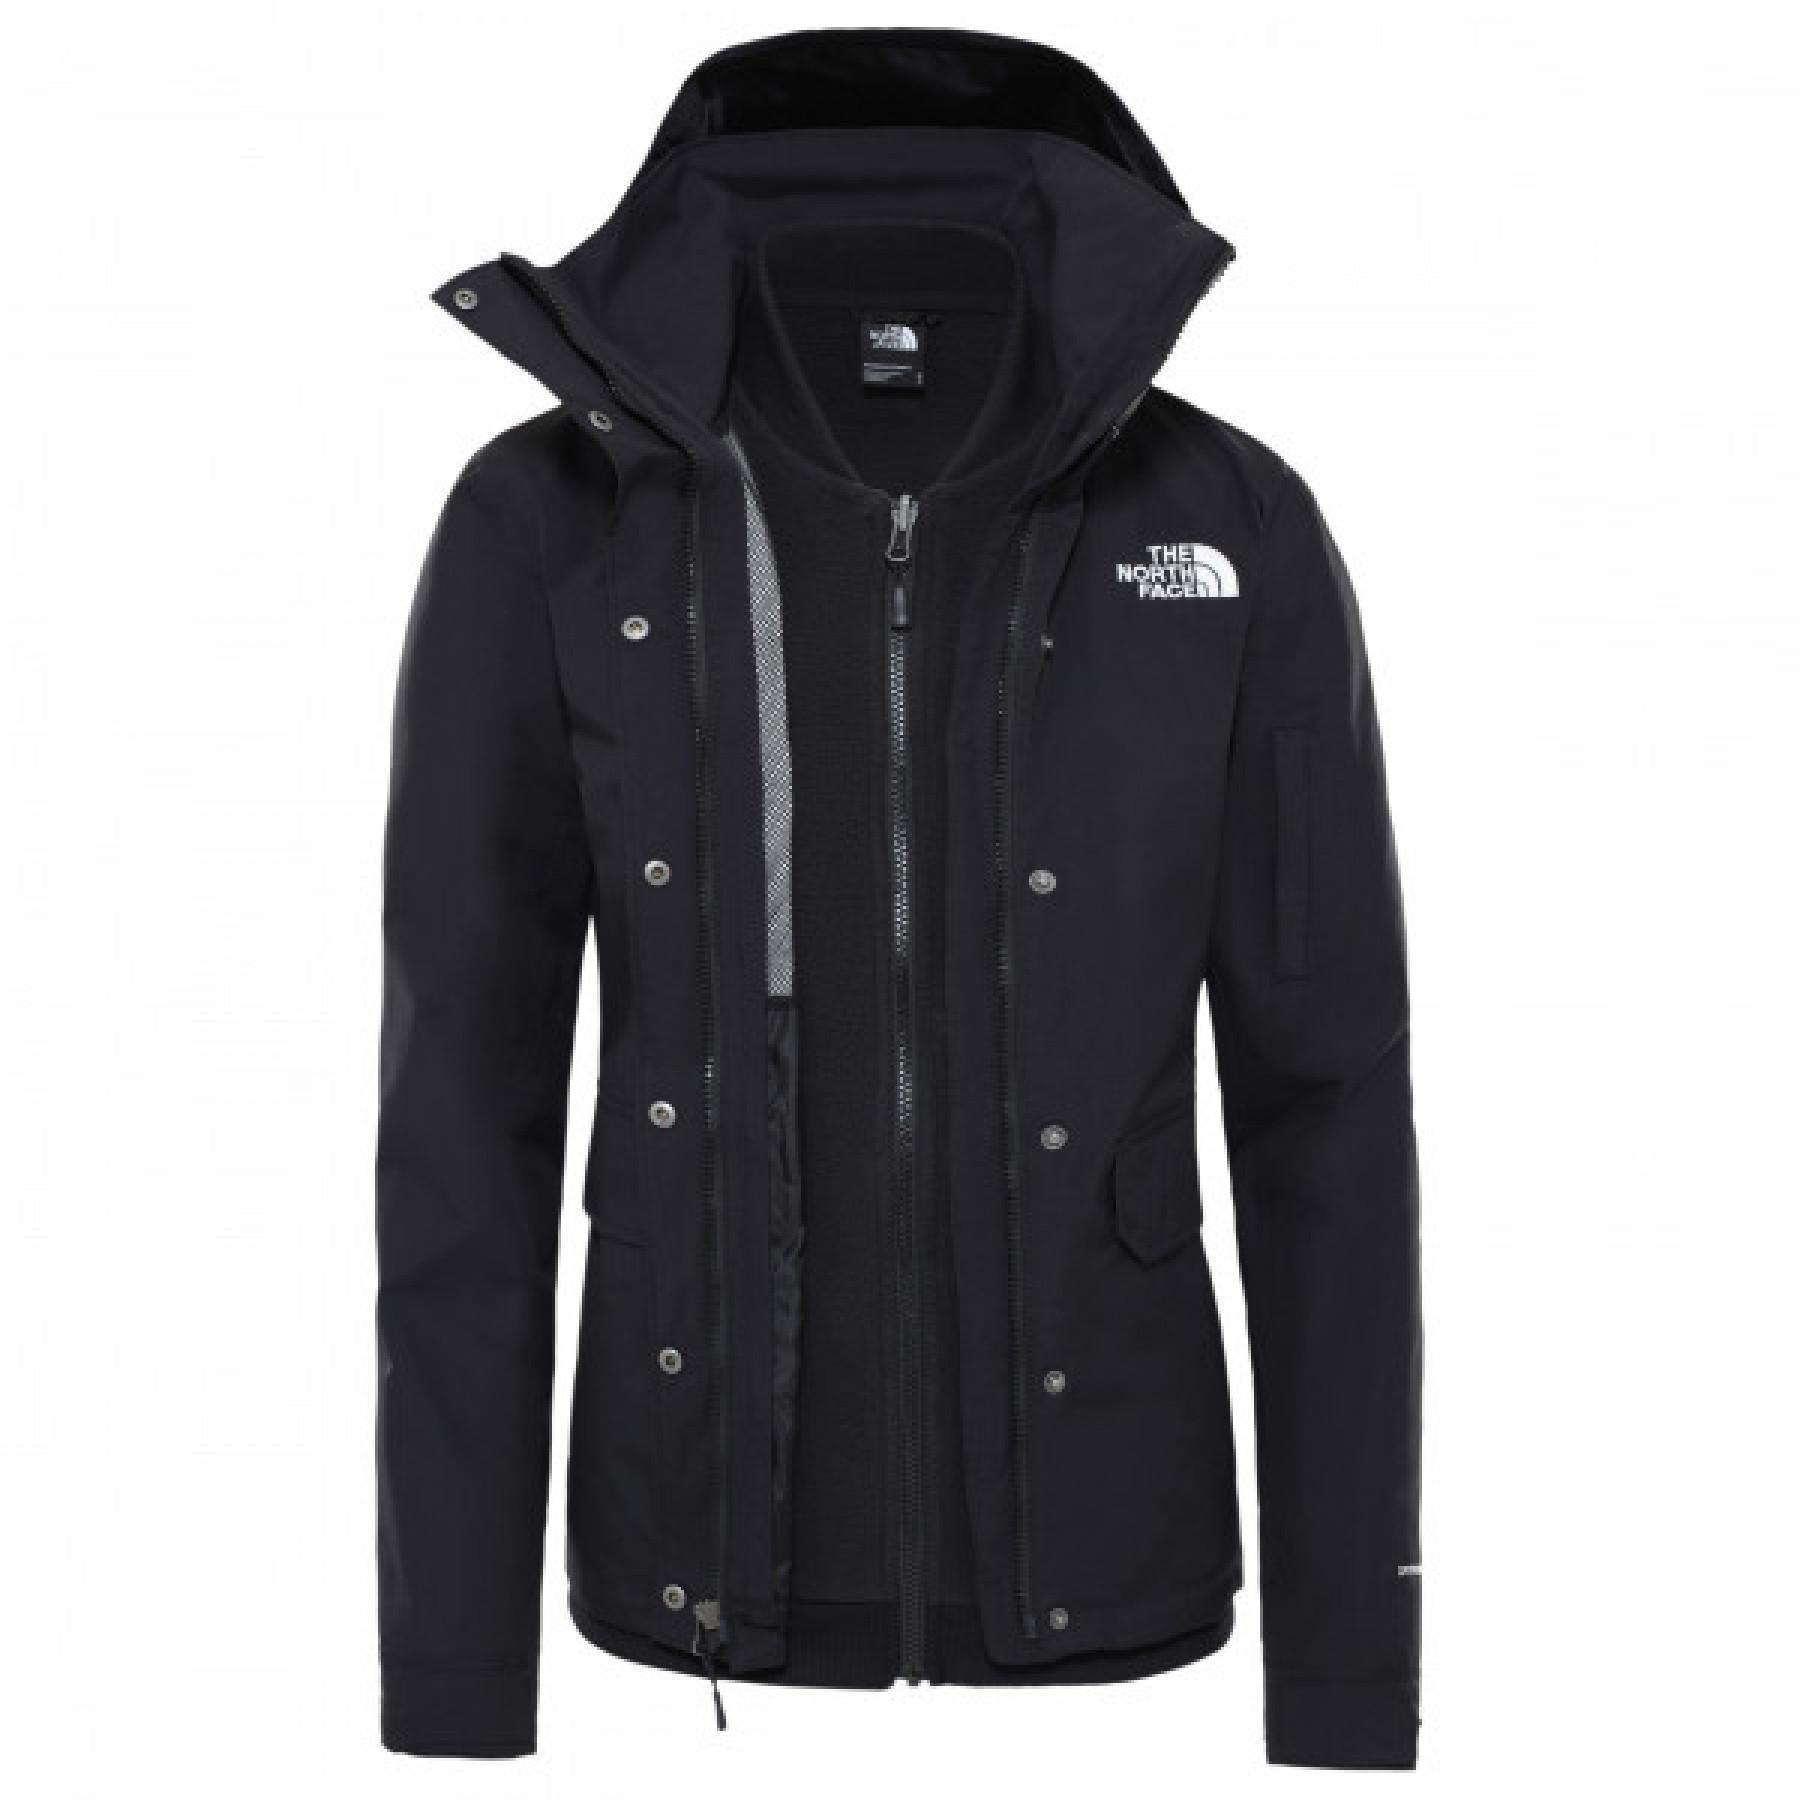 Veste femme The North Face Pinecroft Triclimate